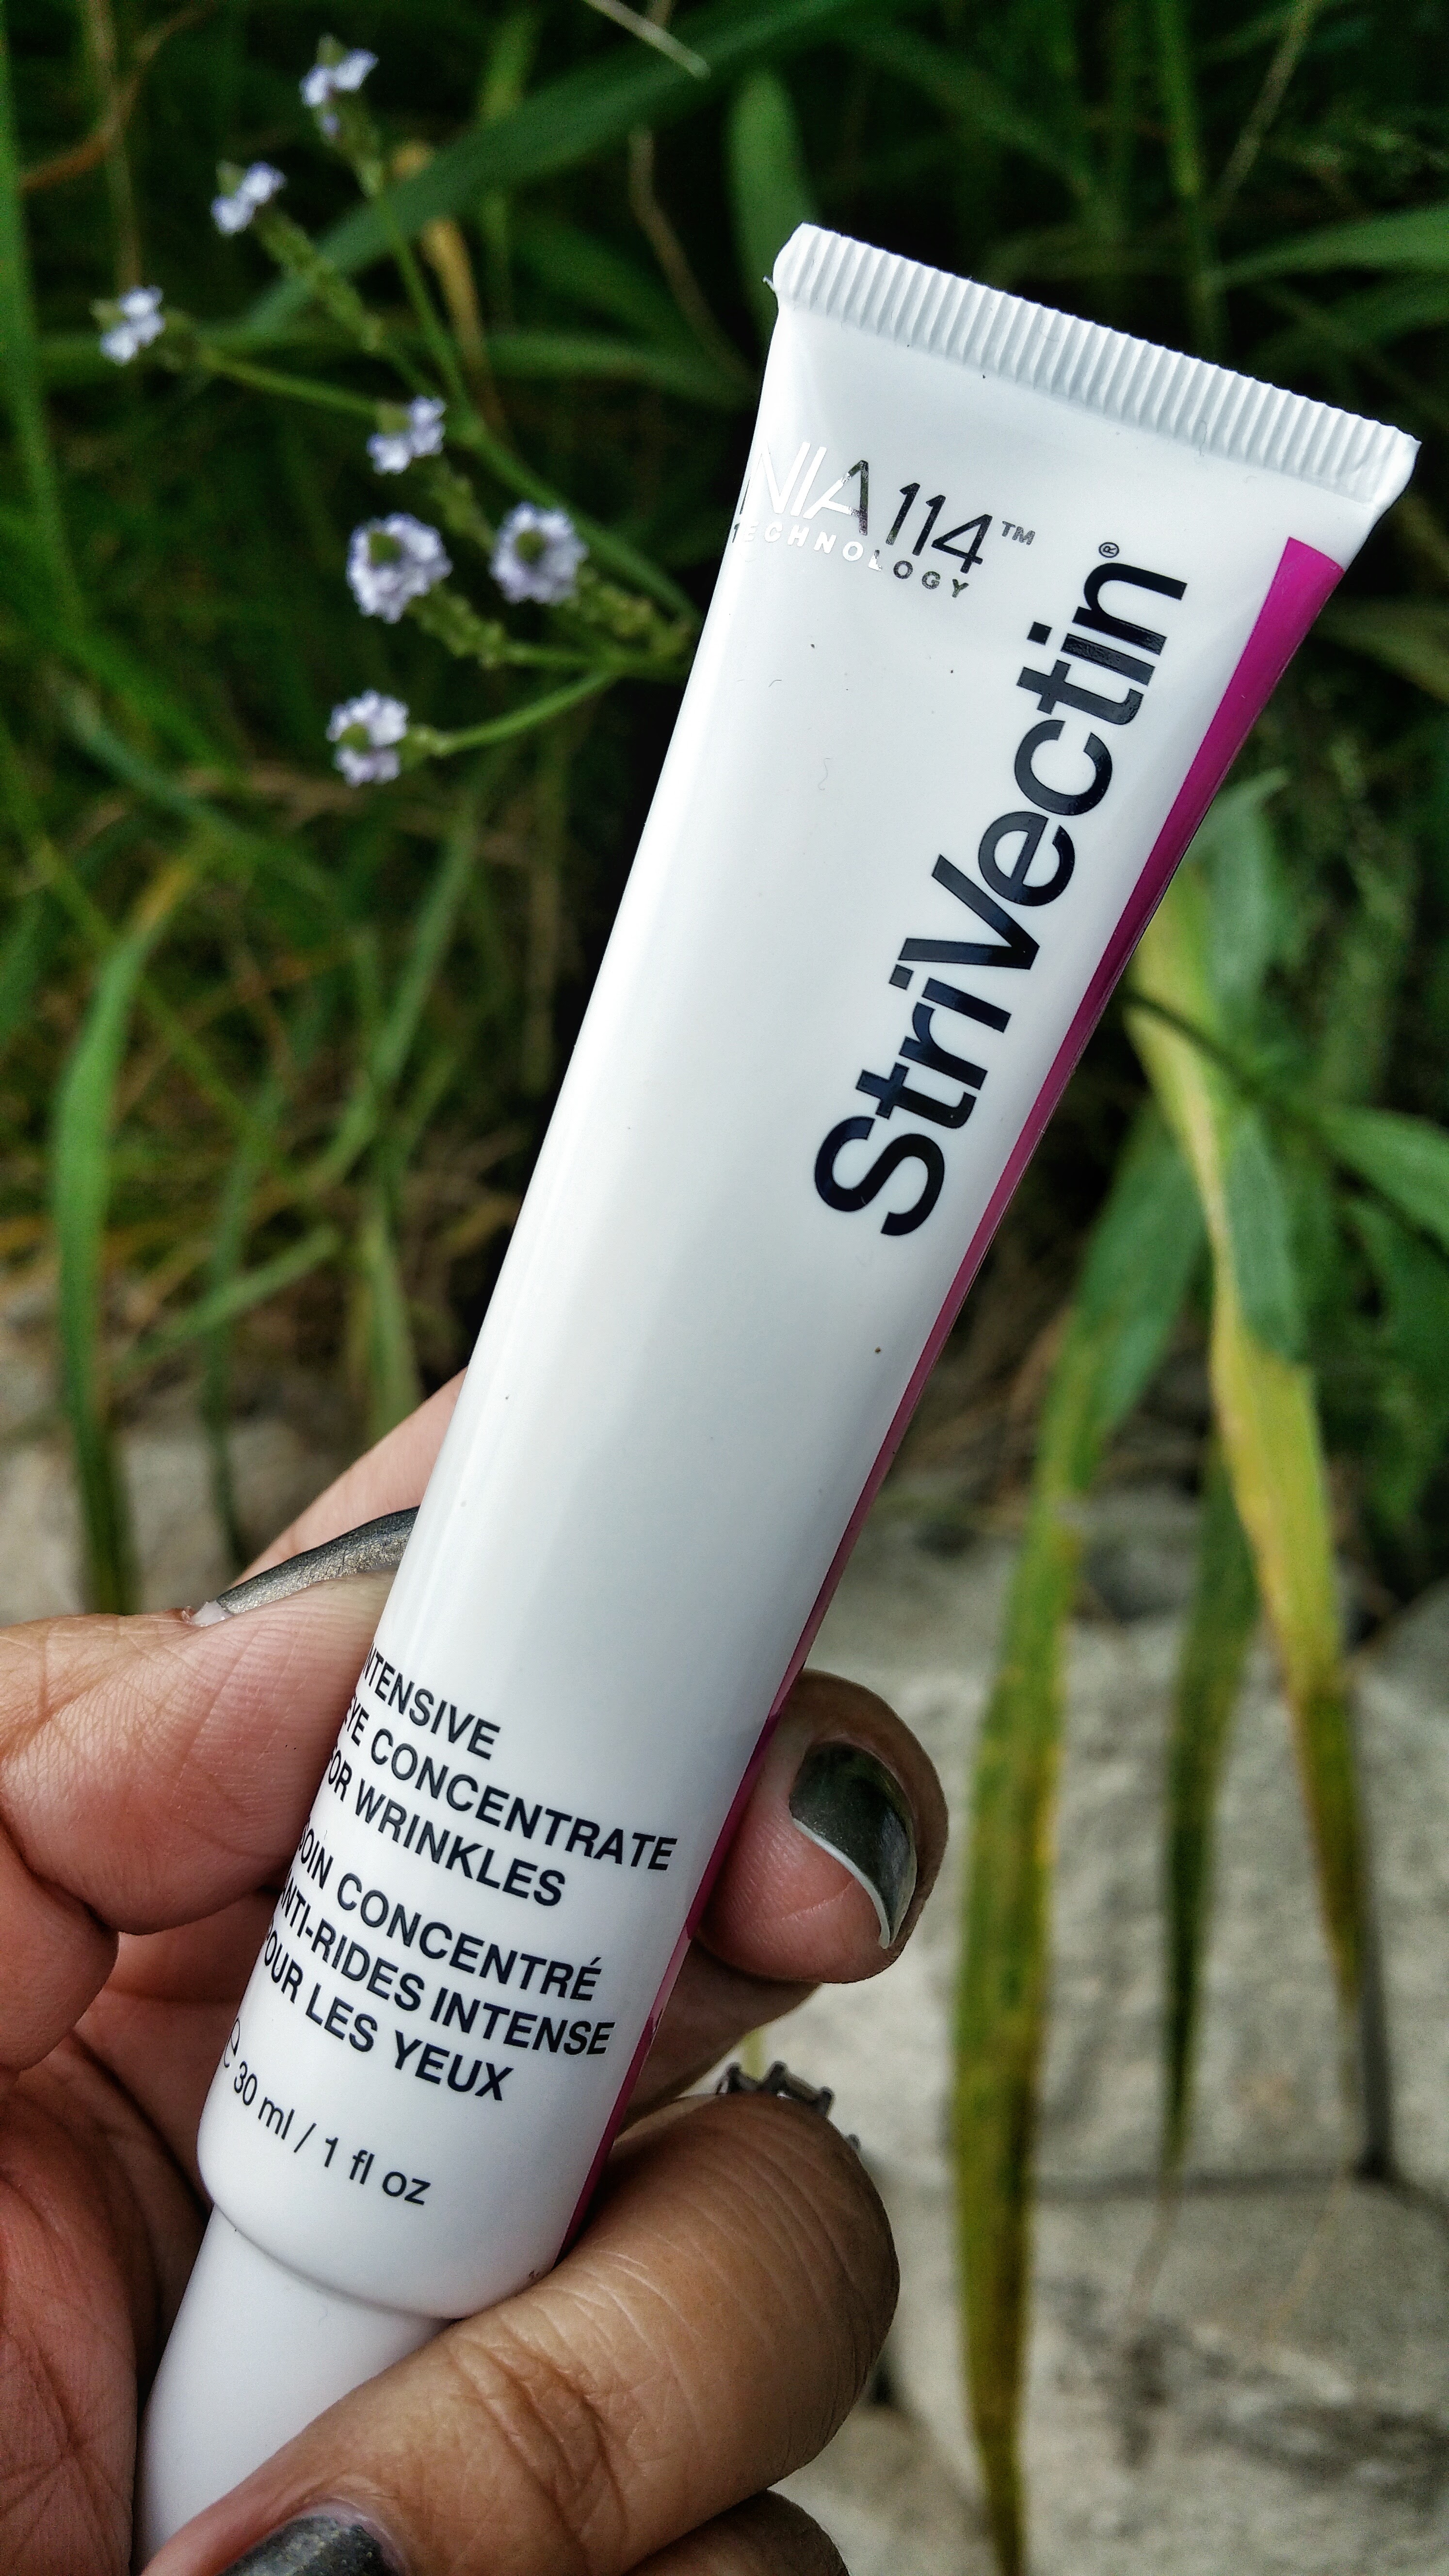 StriVectin, StriVectin Intensive Eye Concentrate for Wrinkles, eye cream, skin care, skincare, review, beauty product, beauty, eye care, wrinkles, anti-aging, intensive eye concentrate, anti-aging eyes, cream, eye serum, youthful,